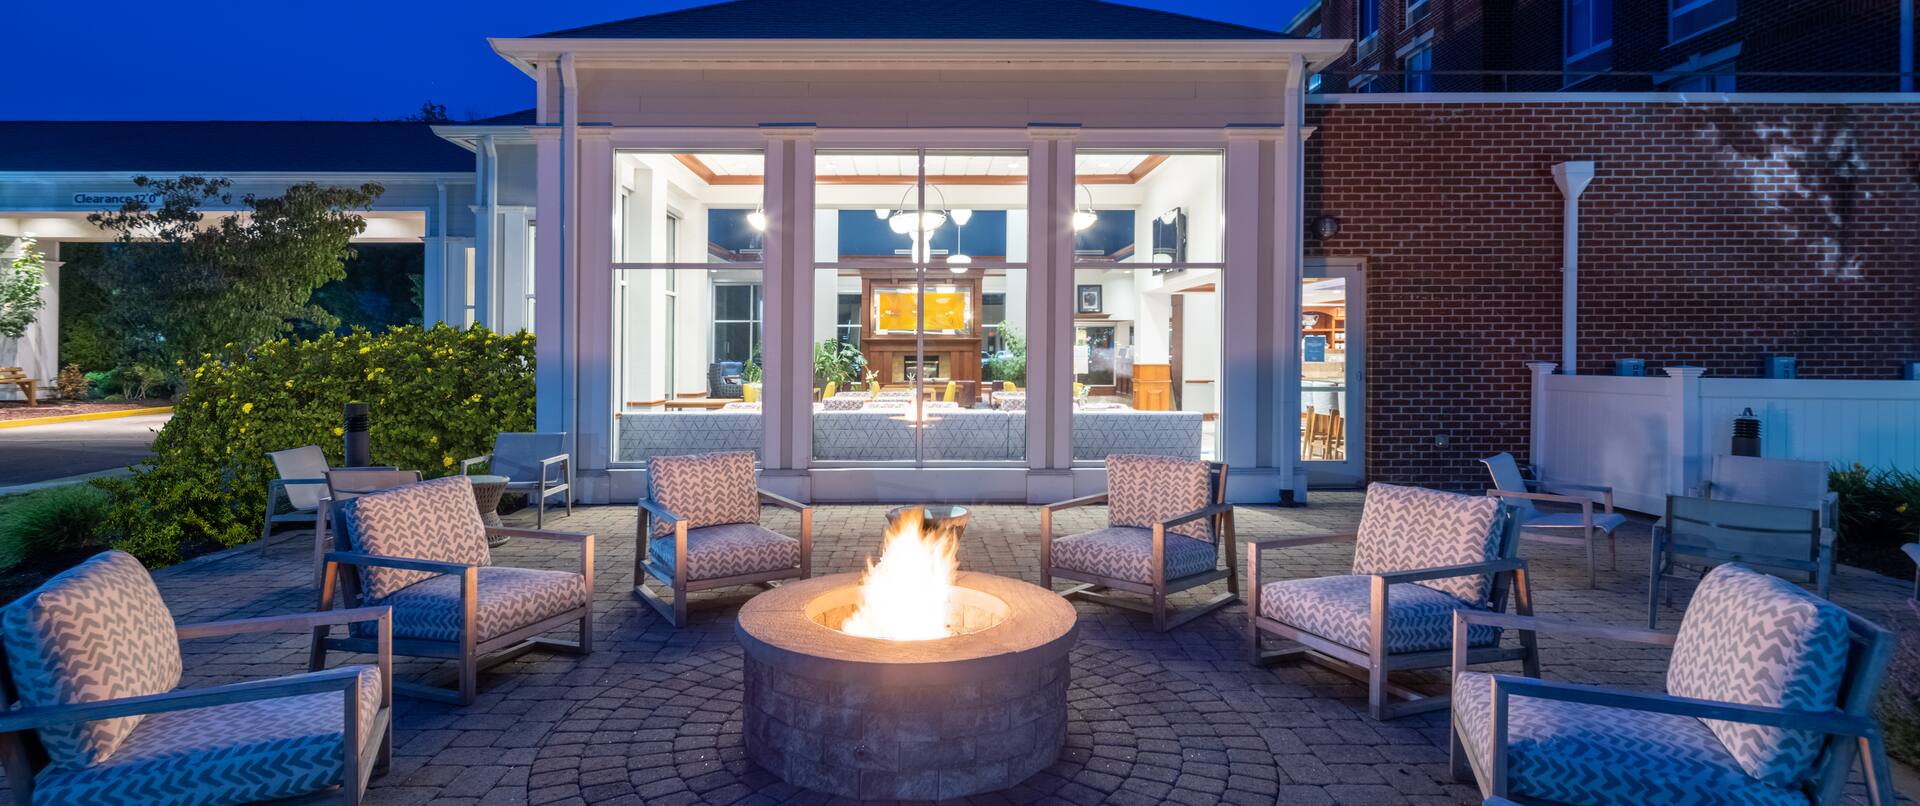 outdoor patio and fire pit